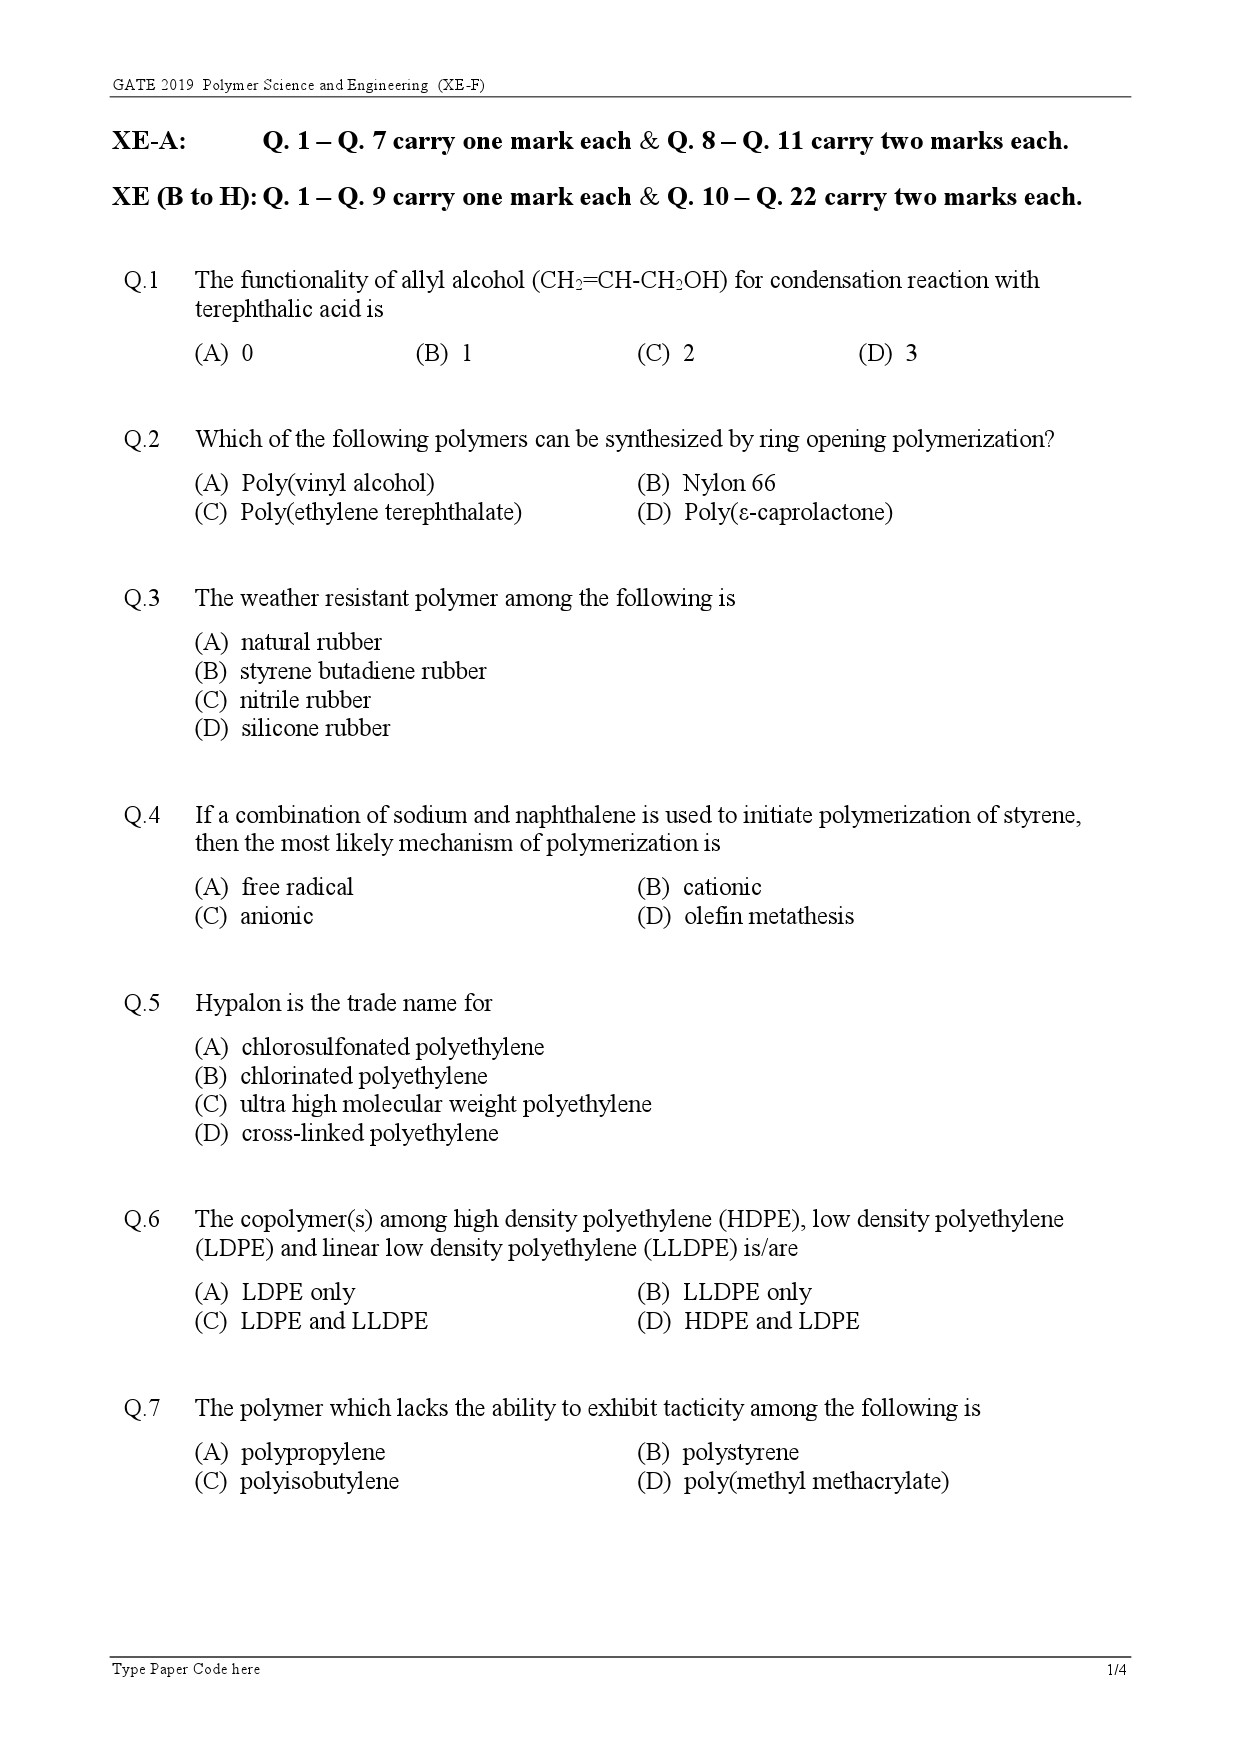 GATE Exam Question Paper 2019 Engineering Sciences 28